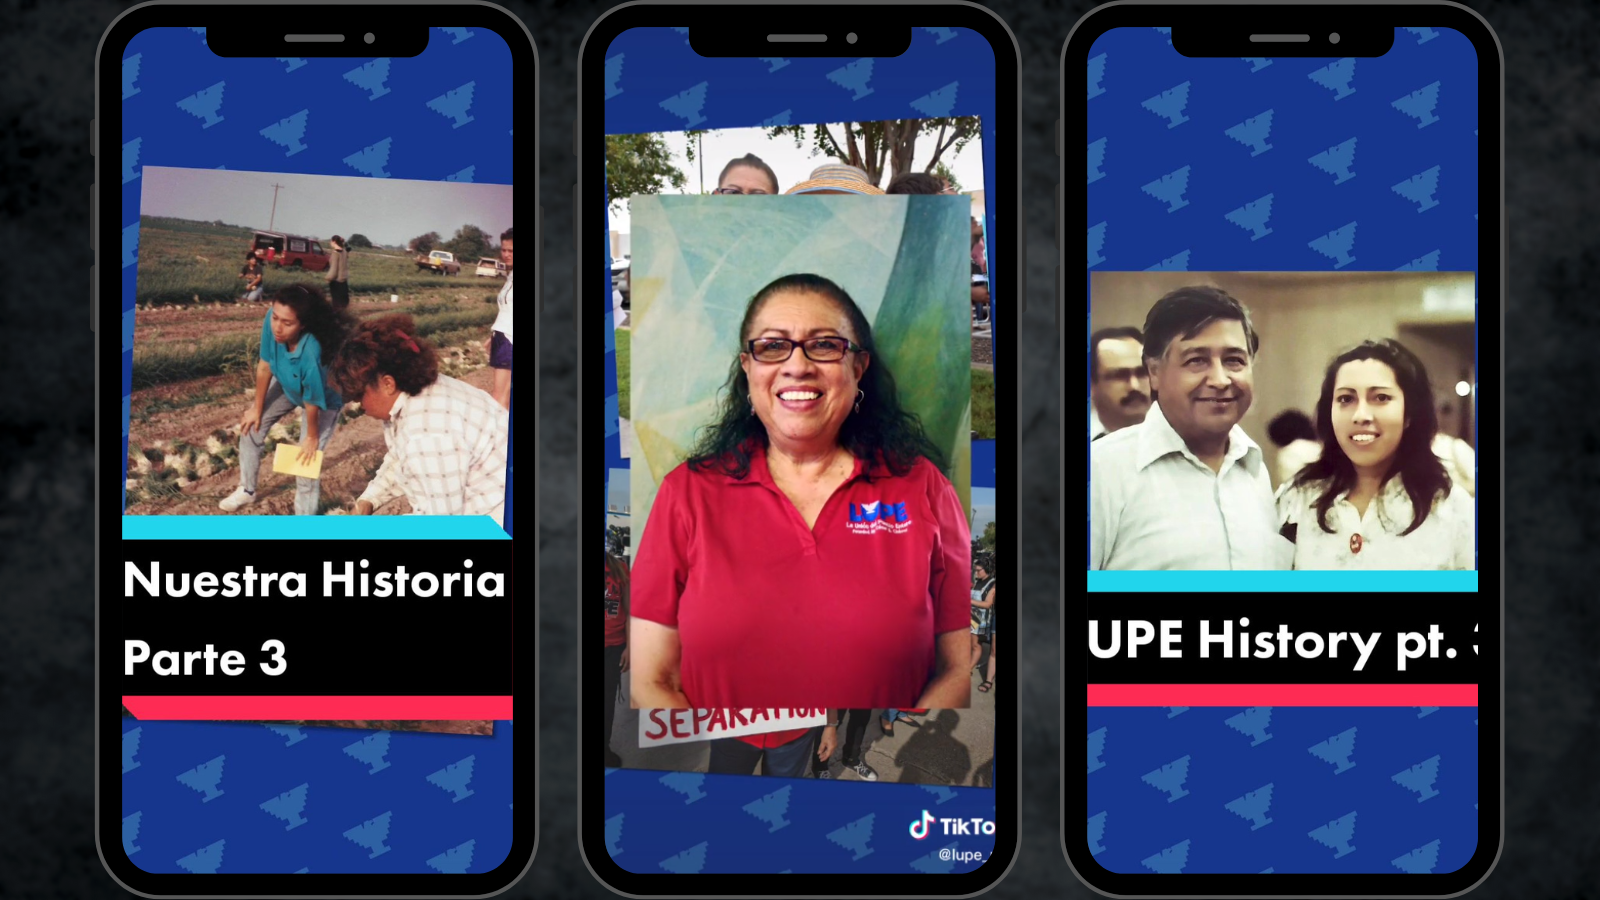 Graphic with three phones, each displaying a photograph of Juanita over the years